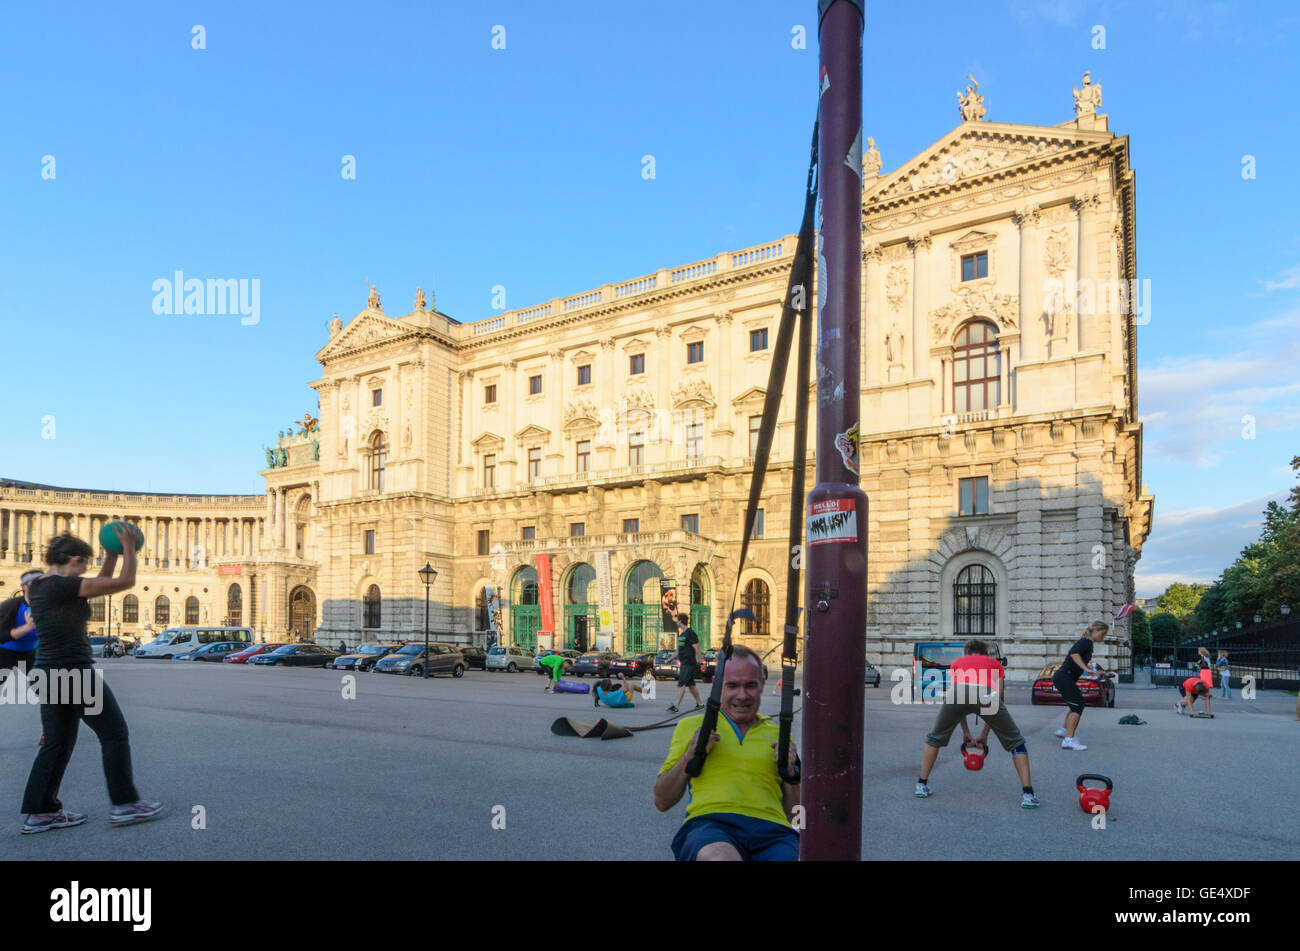 Wien, Vienna: Athletes a fitness boot camp before the Hofburg at last sunlight, Austria, Wien, 01. Stock Photo